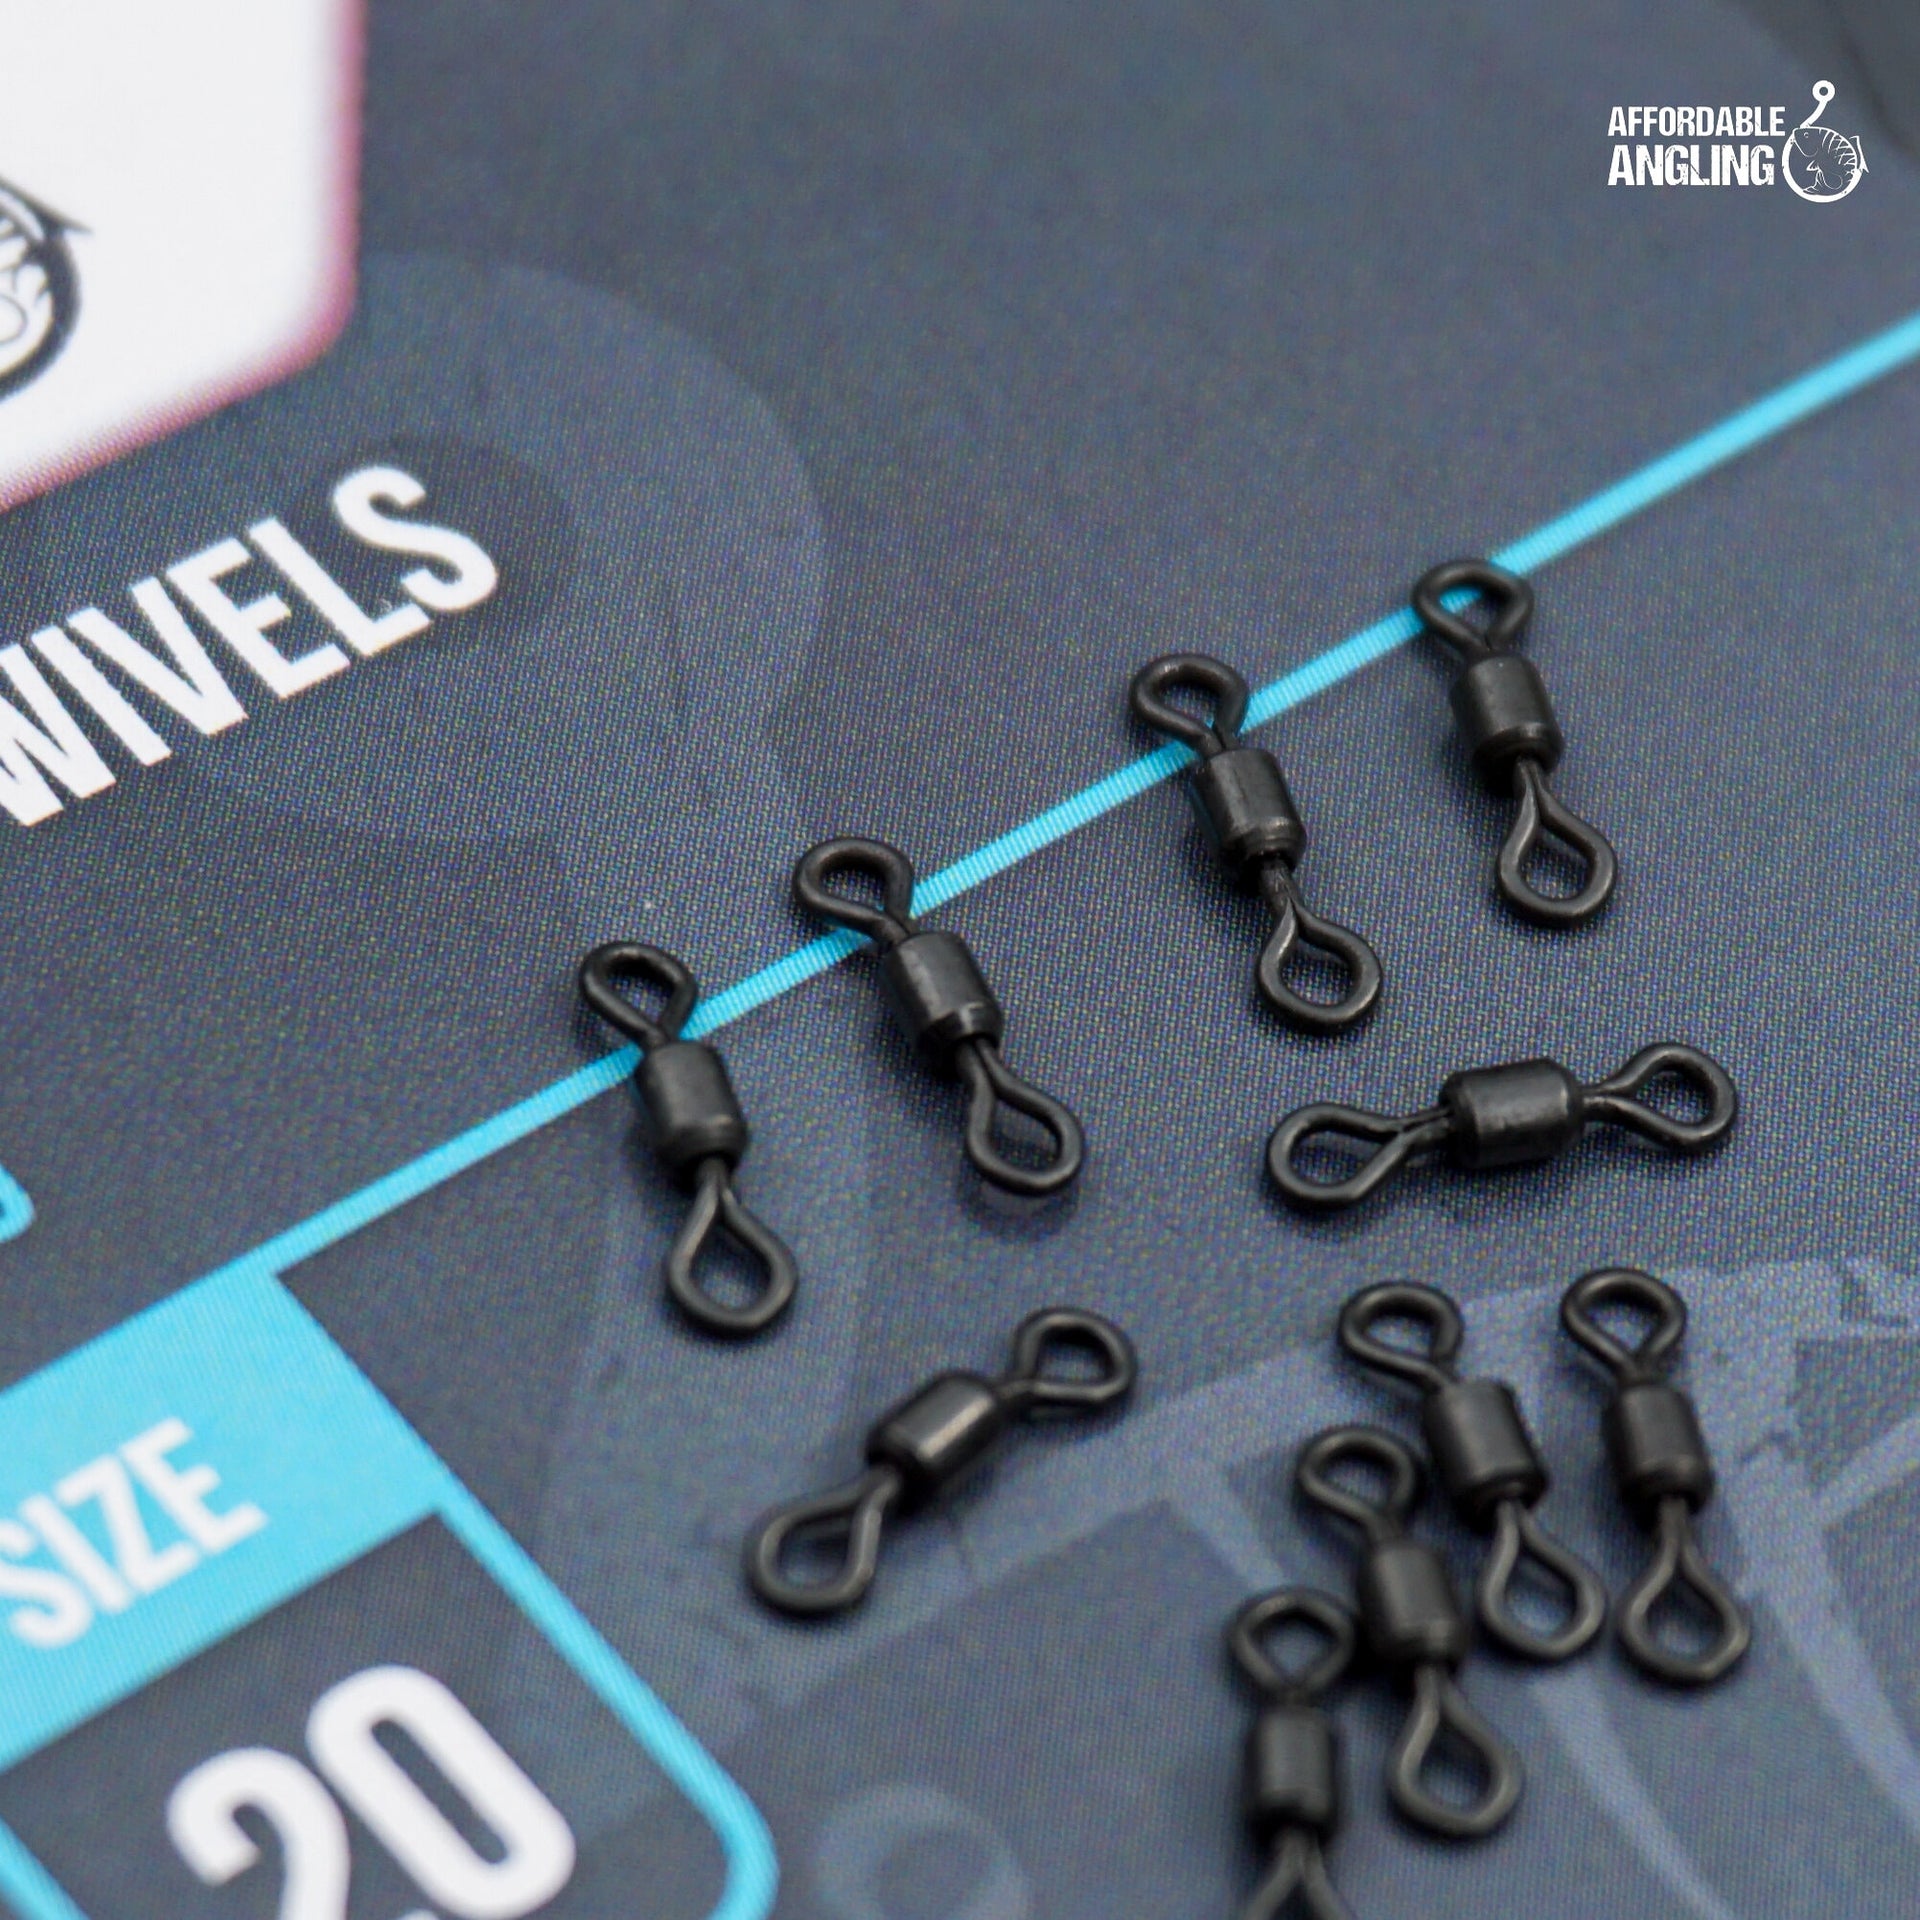 Micro Swivels – Affordable Angling UK